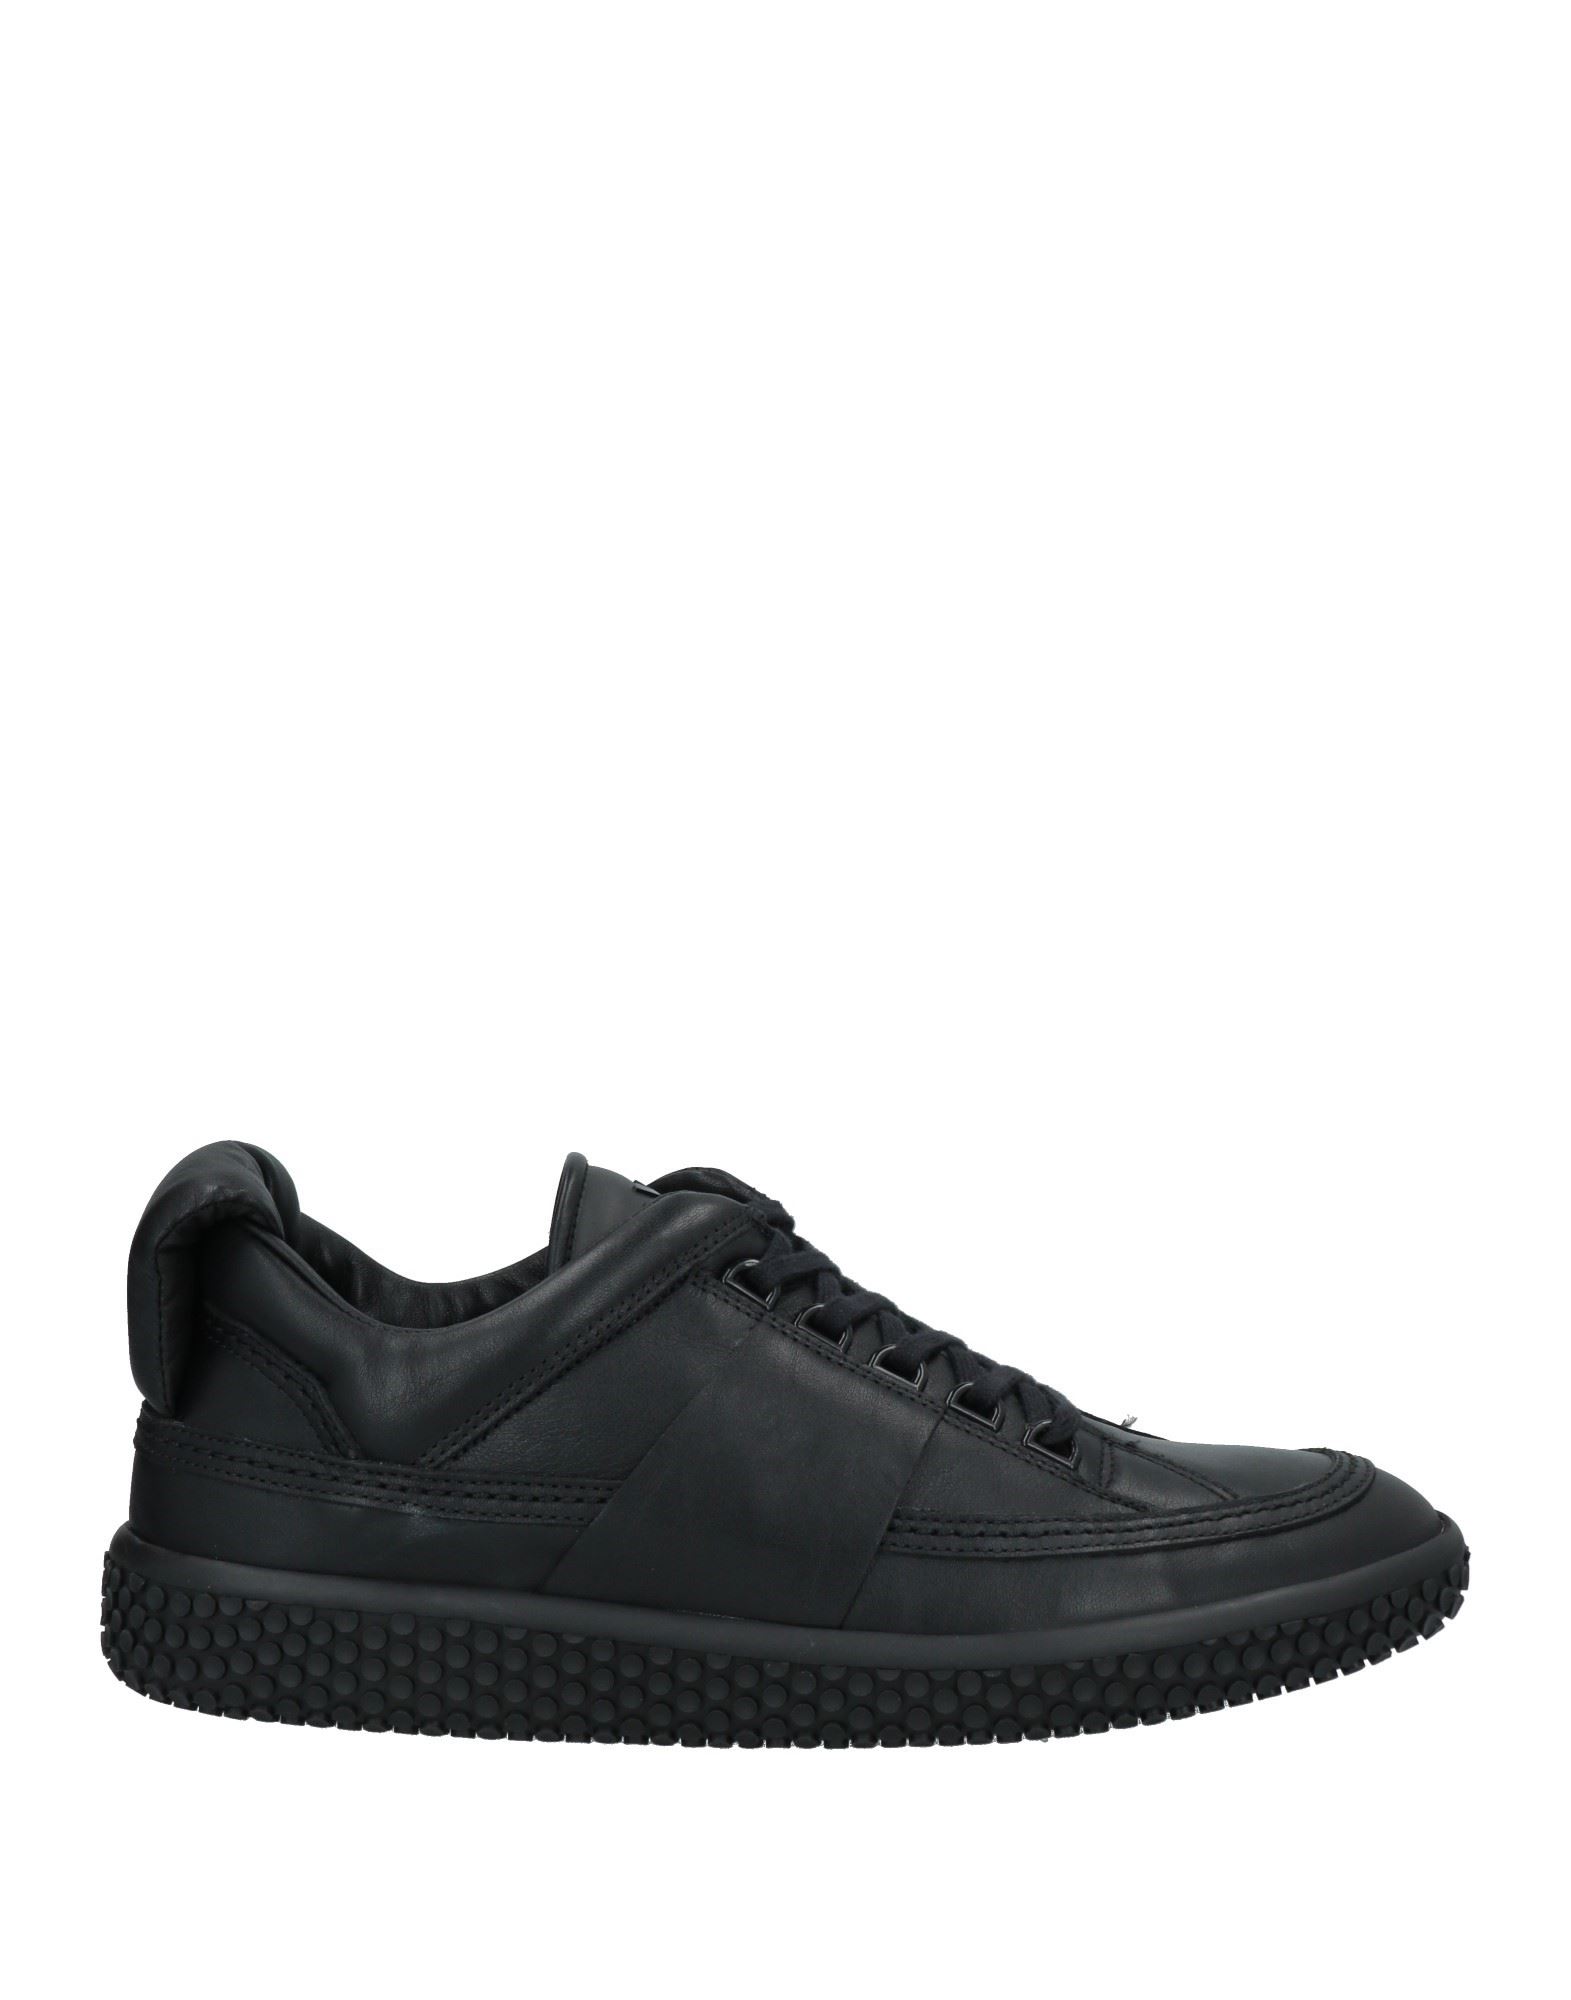 Oxs Sneakers In Black